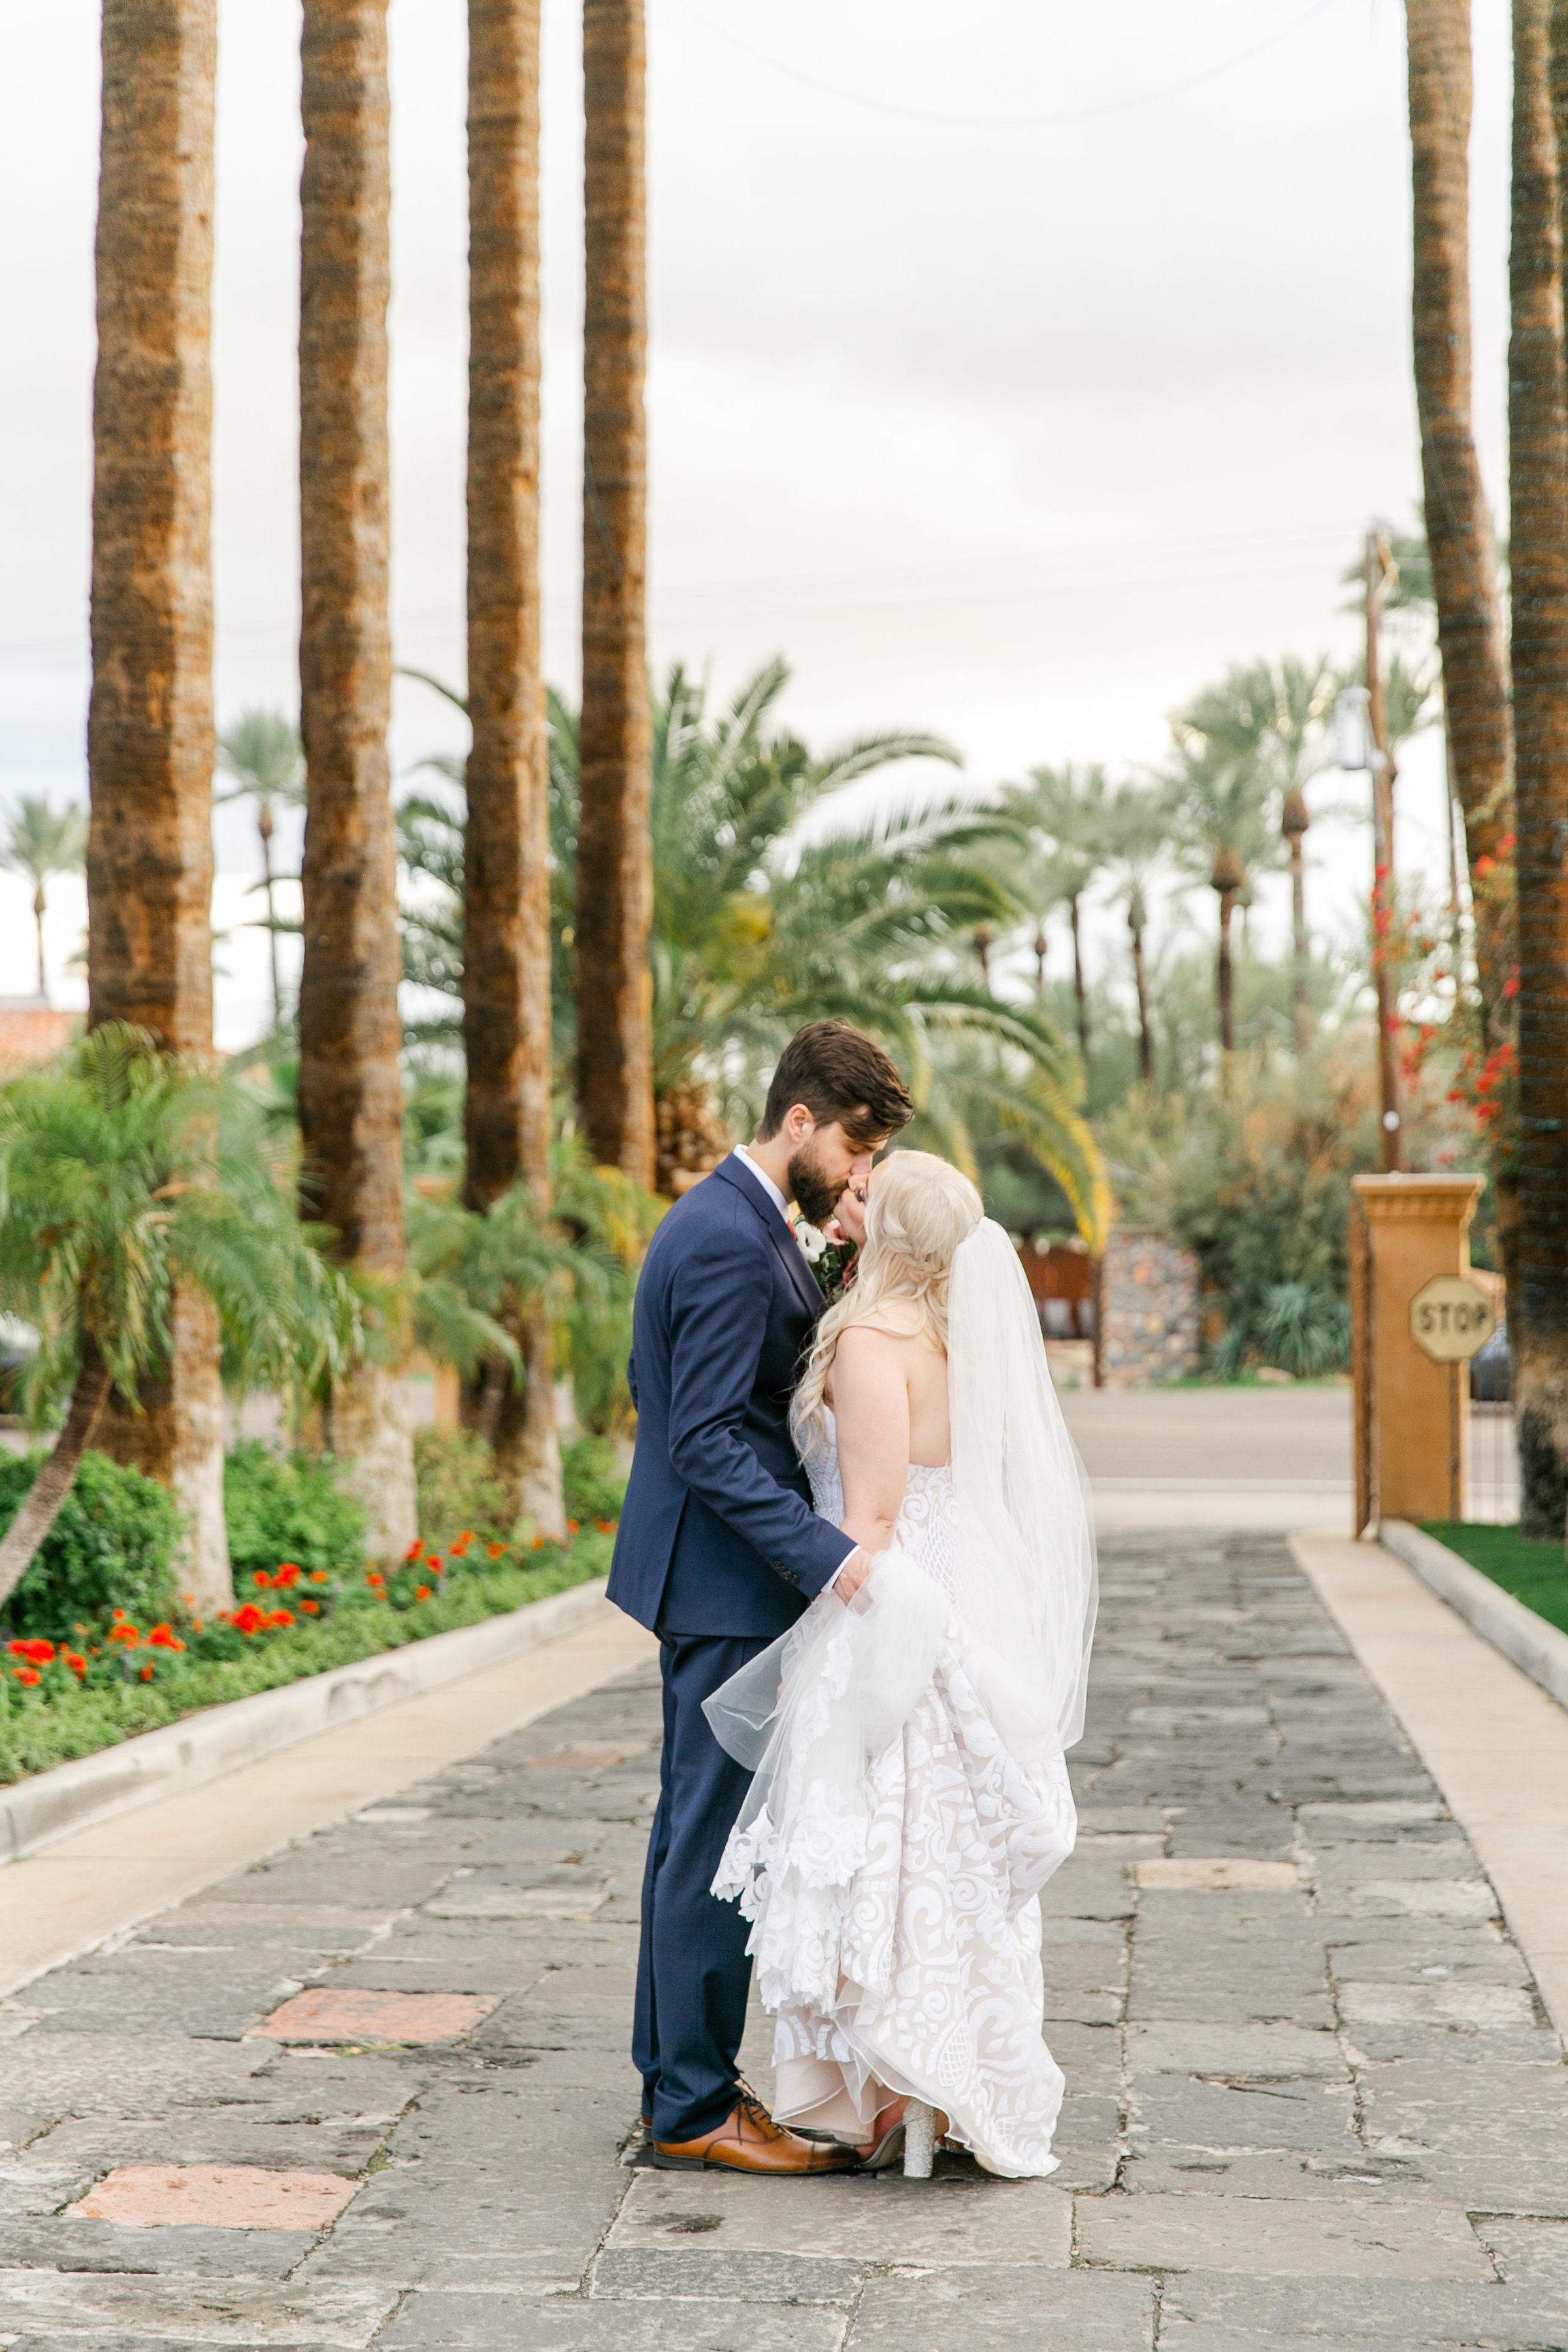 Karlie Colleen Photography - The Royal Palms Wedding - Some Like It Classic - Alex & Sam-576